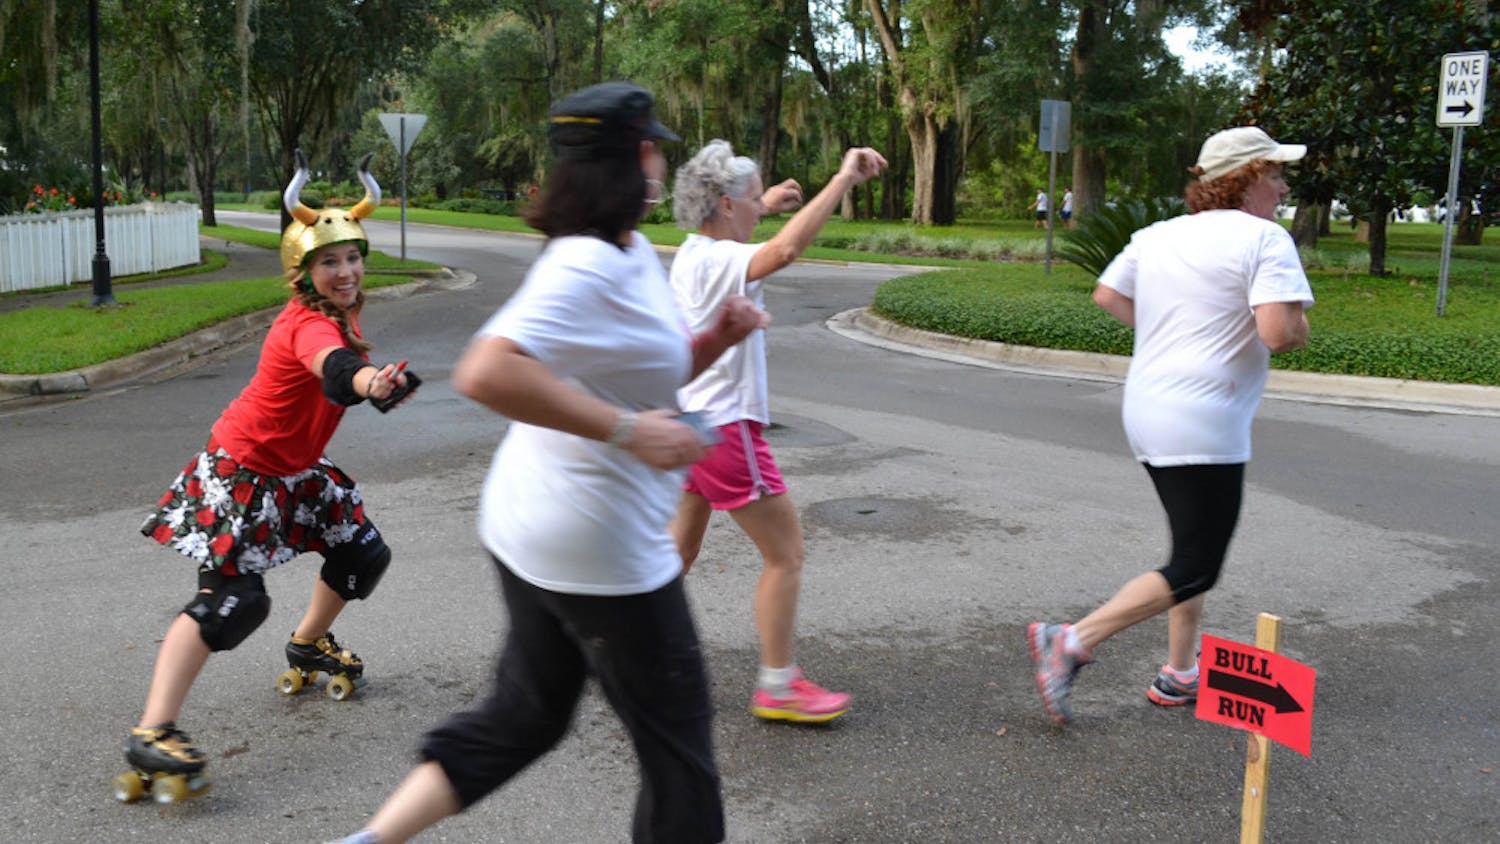 Lily Woodard, who goes by the derby name Slang Blade, chases a group of runners during the Bull Run 5K.